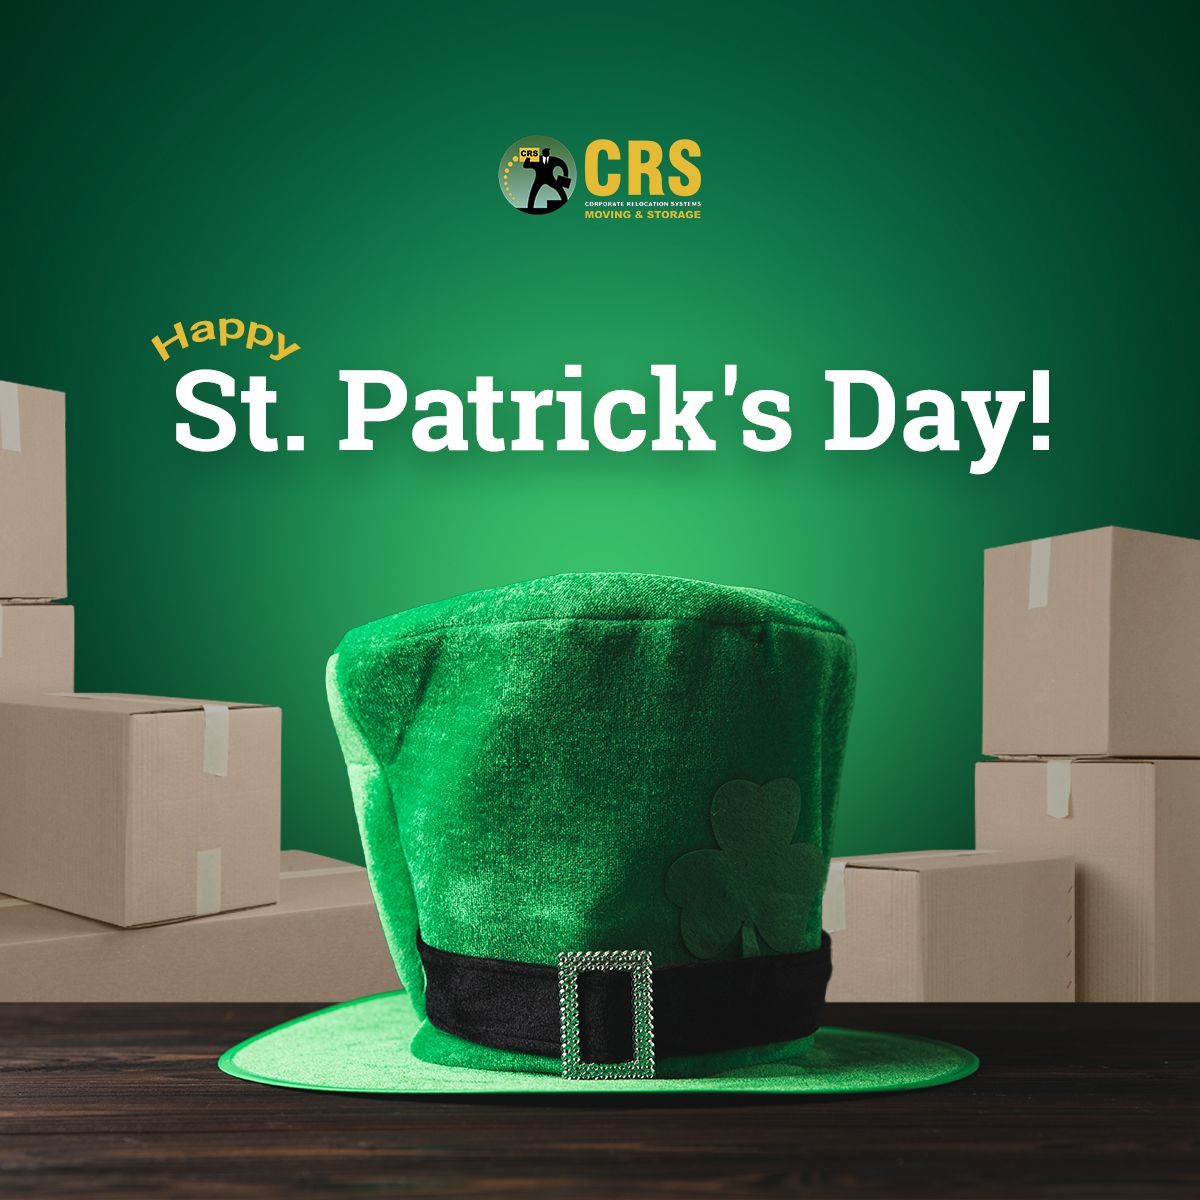 Happy St. Patrick's Day from CRS Moving & Storage🍀🧡 

#OfficeLiquidation #OfficeStorage #OfficeMove #NYCMovers #CorporateMovers #NYCBusinessMovers #NYC #BusinessMovers #newyorkmovers #CRSmovers #CorporateMovingCompany #Relocation #OfficeRelocation